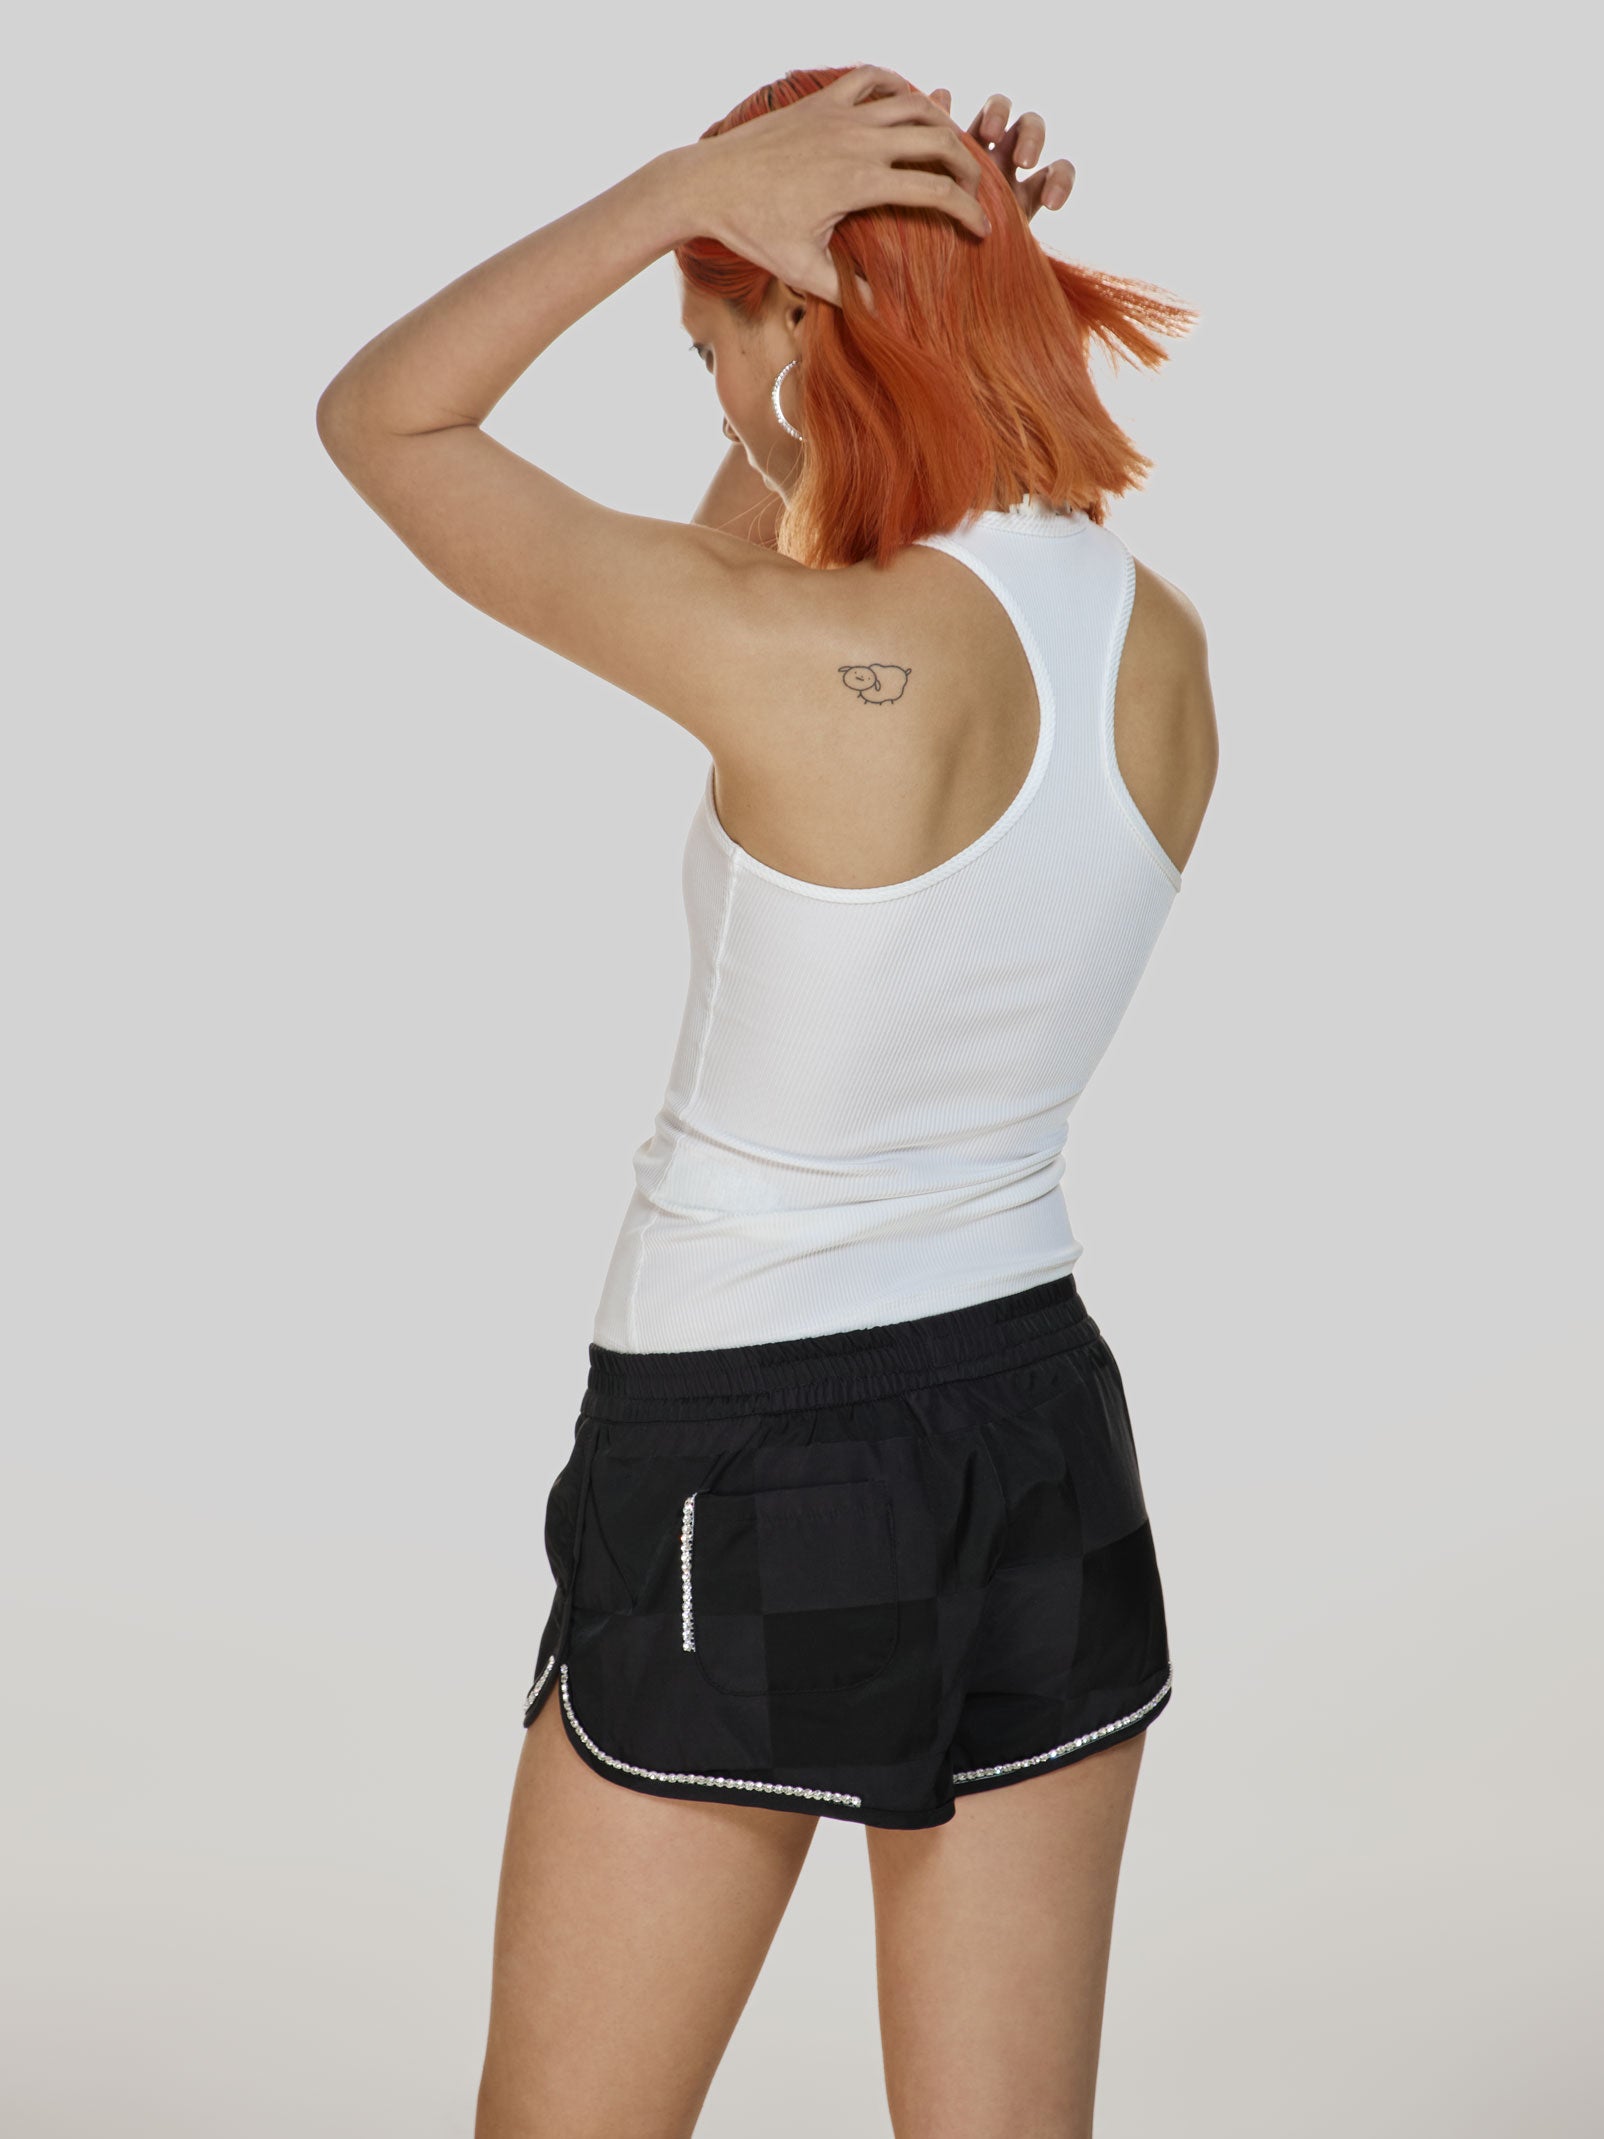 Cowboy shot of a girl facing back in a white viscose tank top and black checkered cotton shorts, decorated with rhinestones